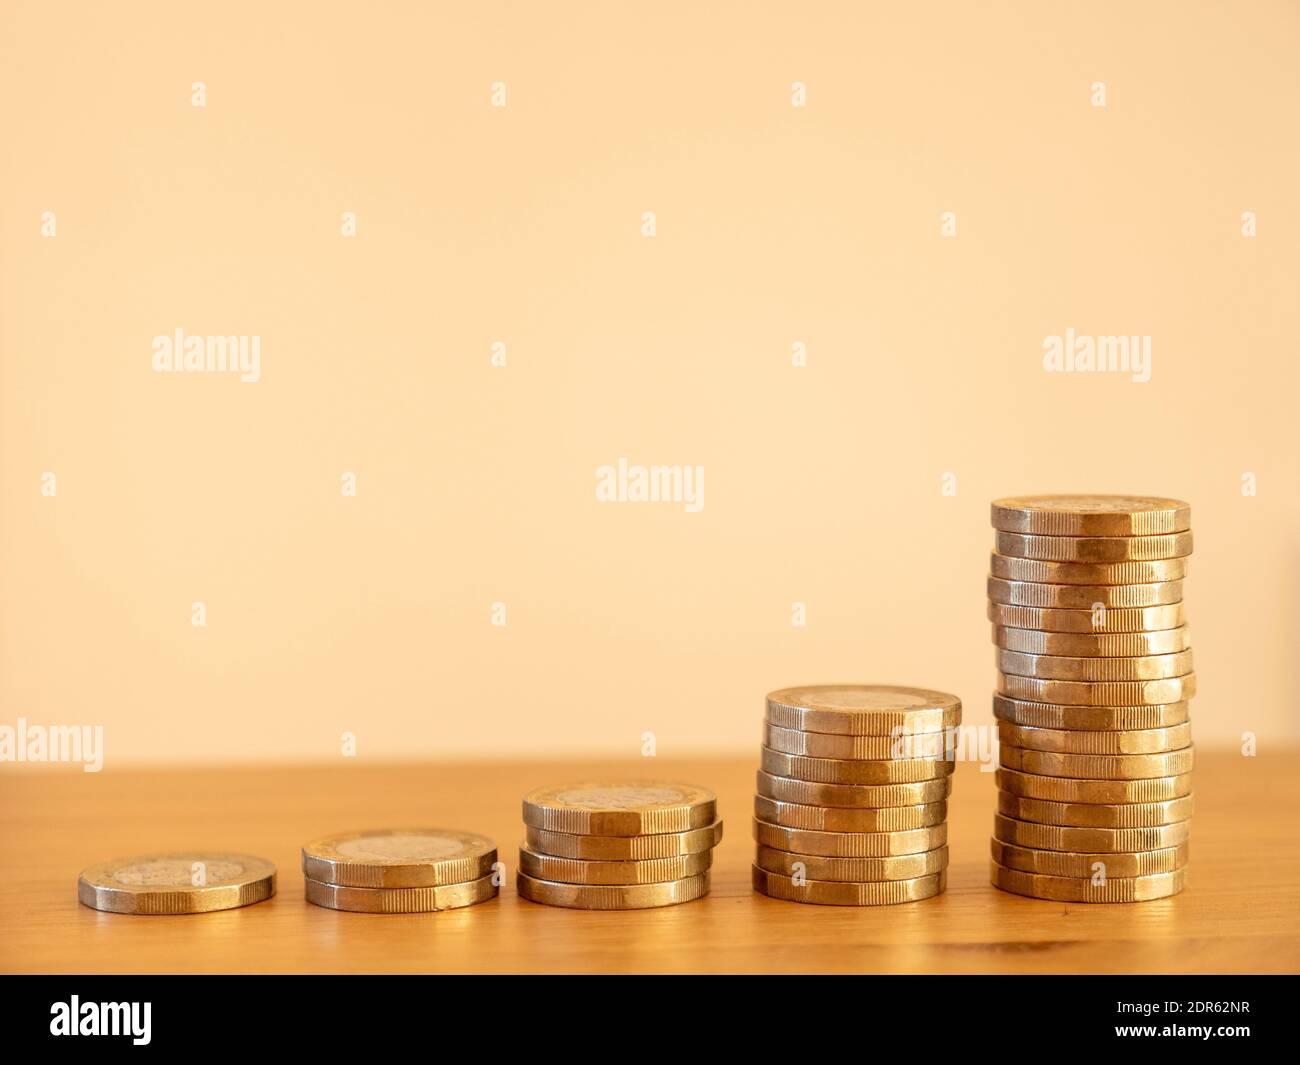 Close up of stacks of many GBP one pound coins increasing in size as money going up symbolising saving wealth, UK Stock Photo